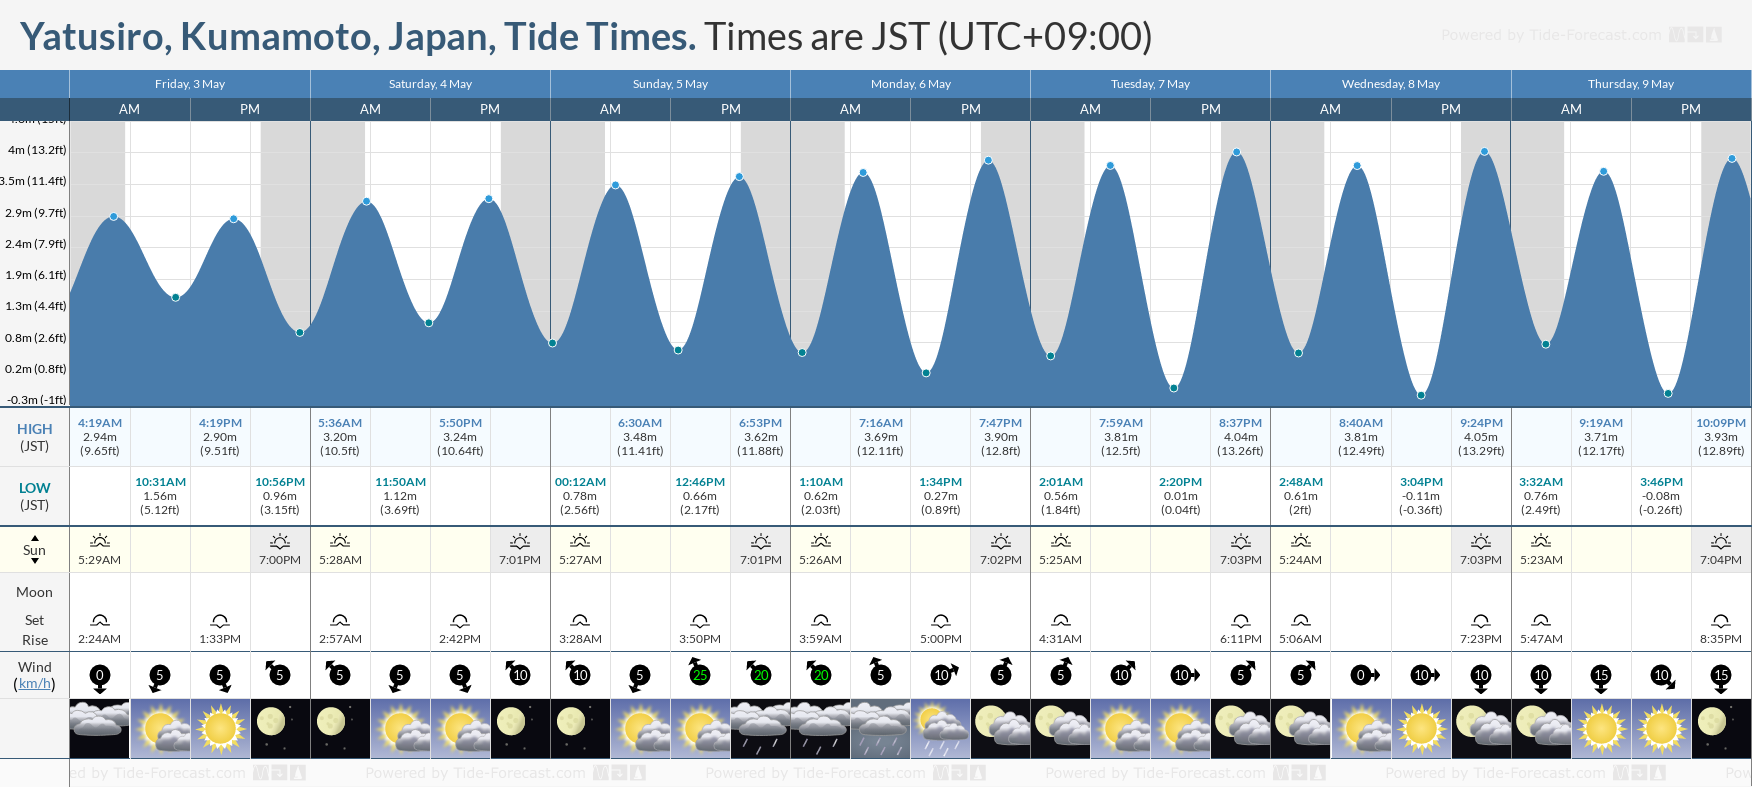 Yatusiro, Kumamoto, Japan Tide Chart including high and low tide tide times for the next 7 days